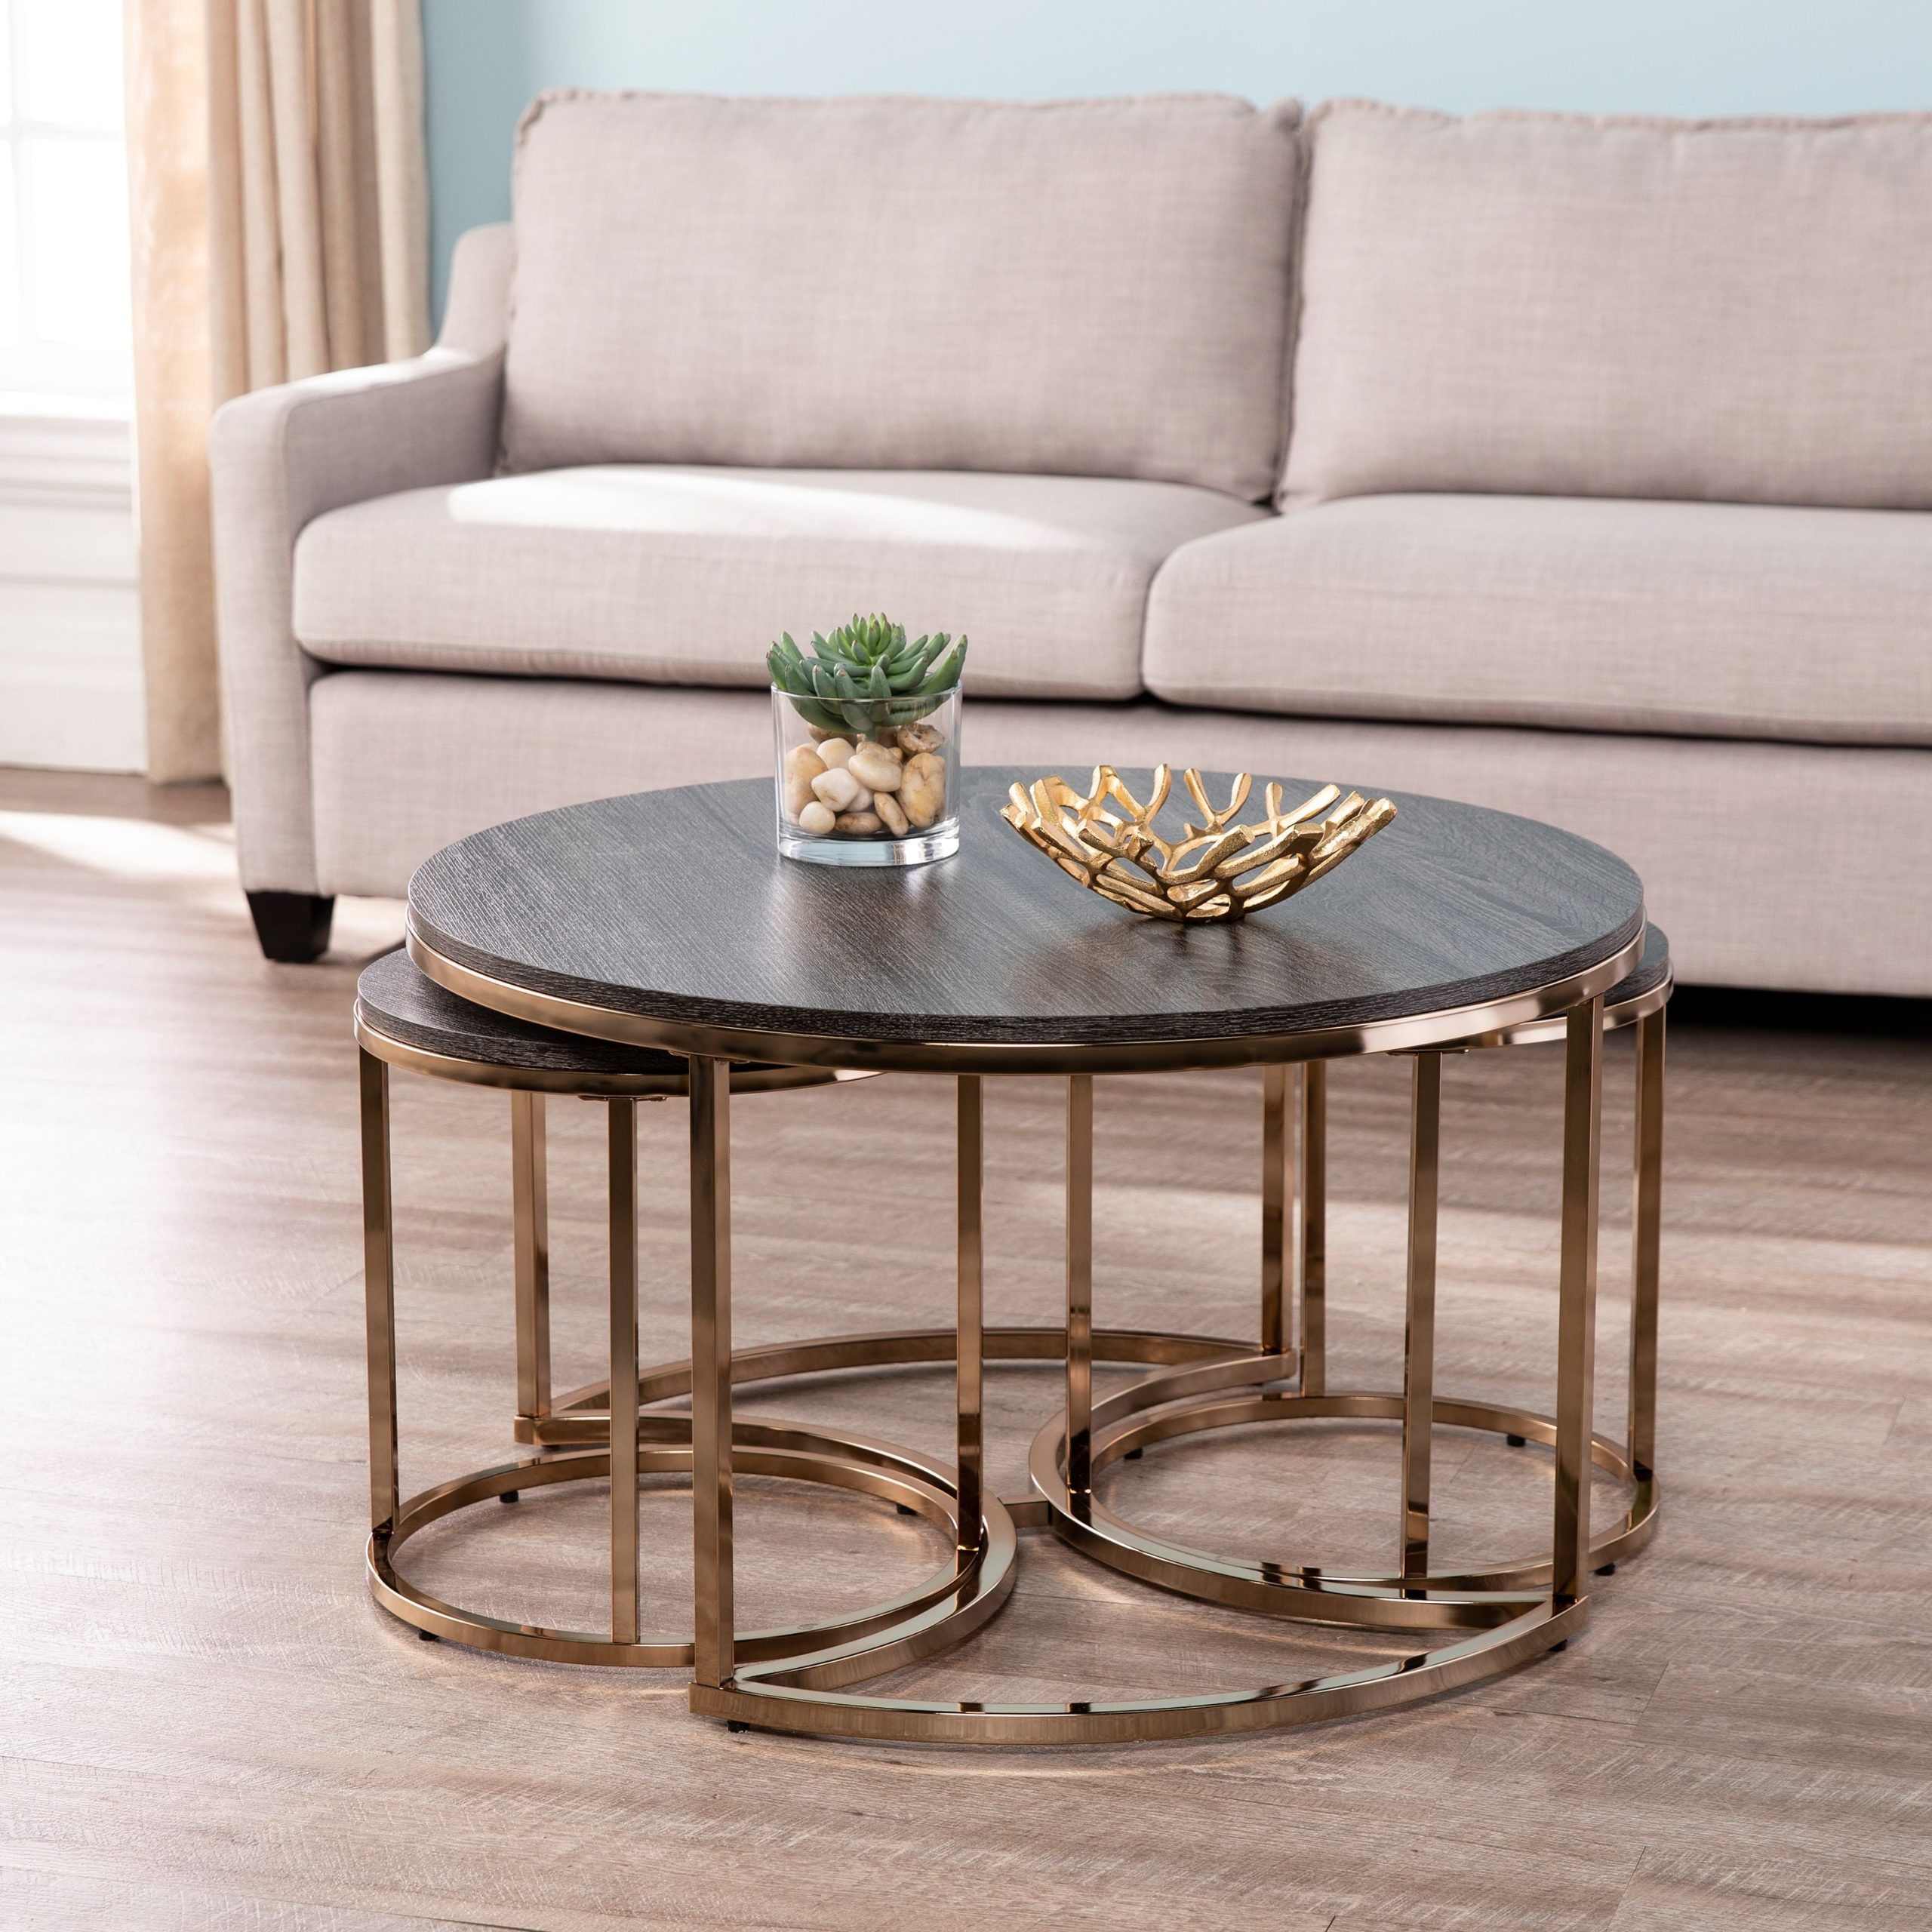 Ember Interiors Lokyle Metal And Wood Round Nesting Coffee Table, 3 Regarding Coffee Tables Of 3 Nesting Tables (View 11 of 15)